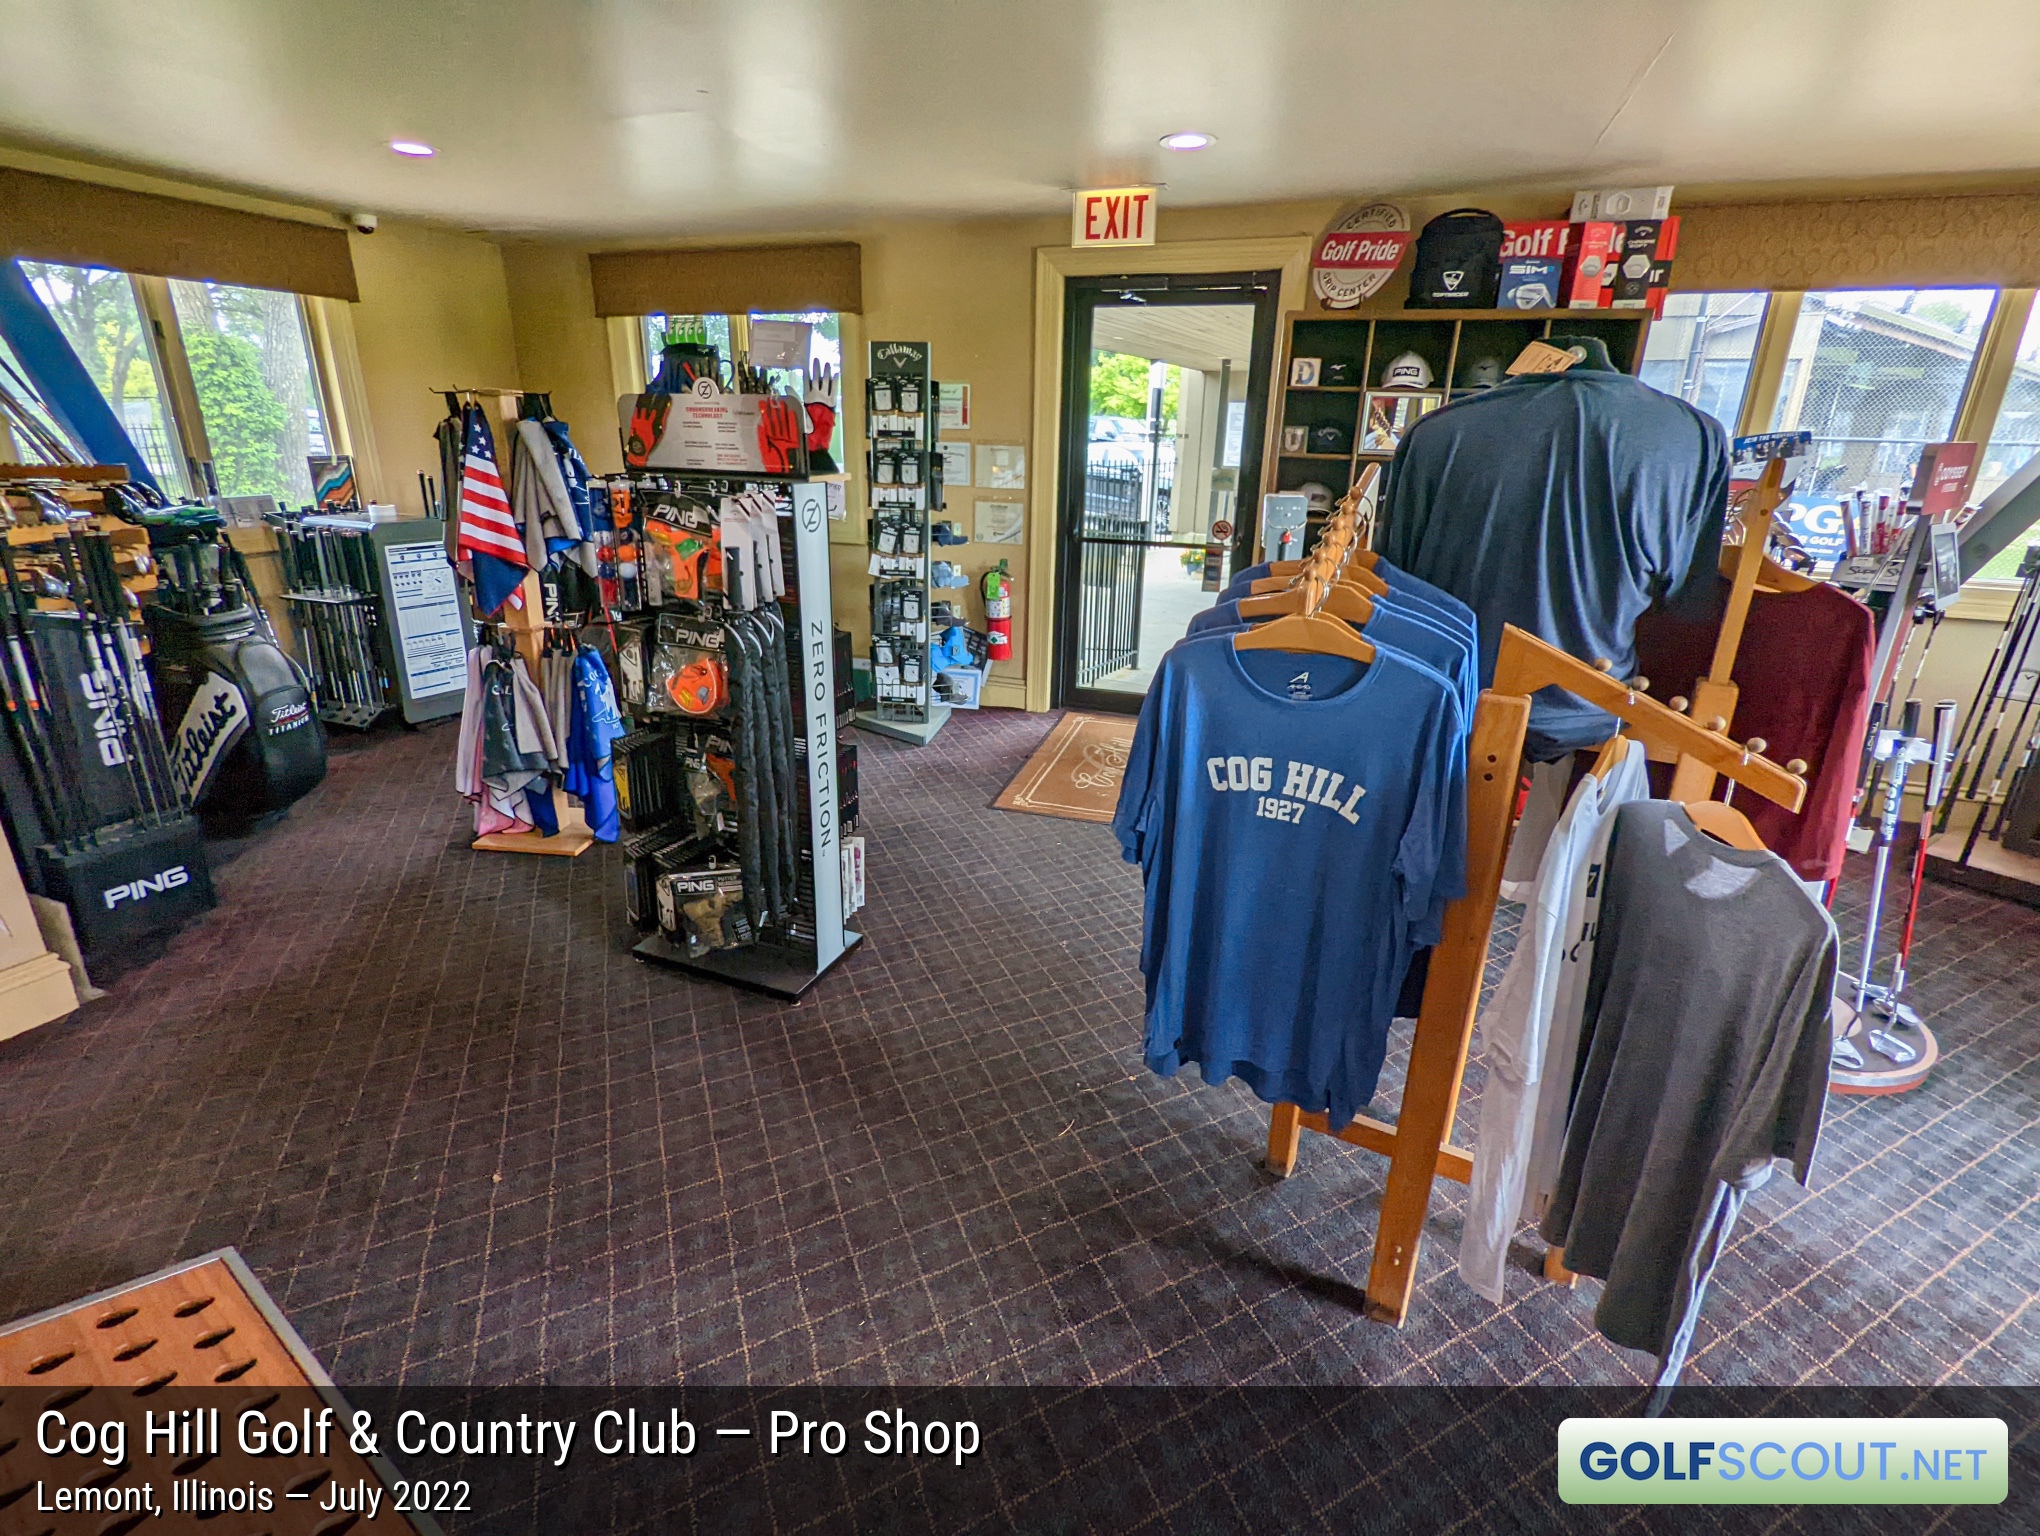 Photo of the pro shop at Cog Hill Course #1 in Lemont, Illinois. The pro shop at the driving range is the smallest of the three pro shops.